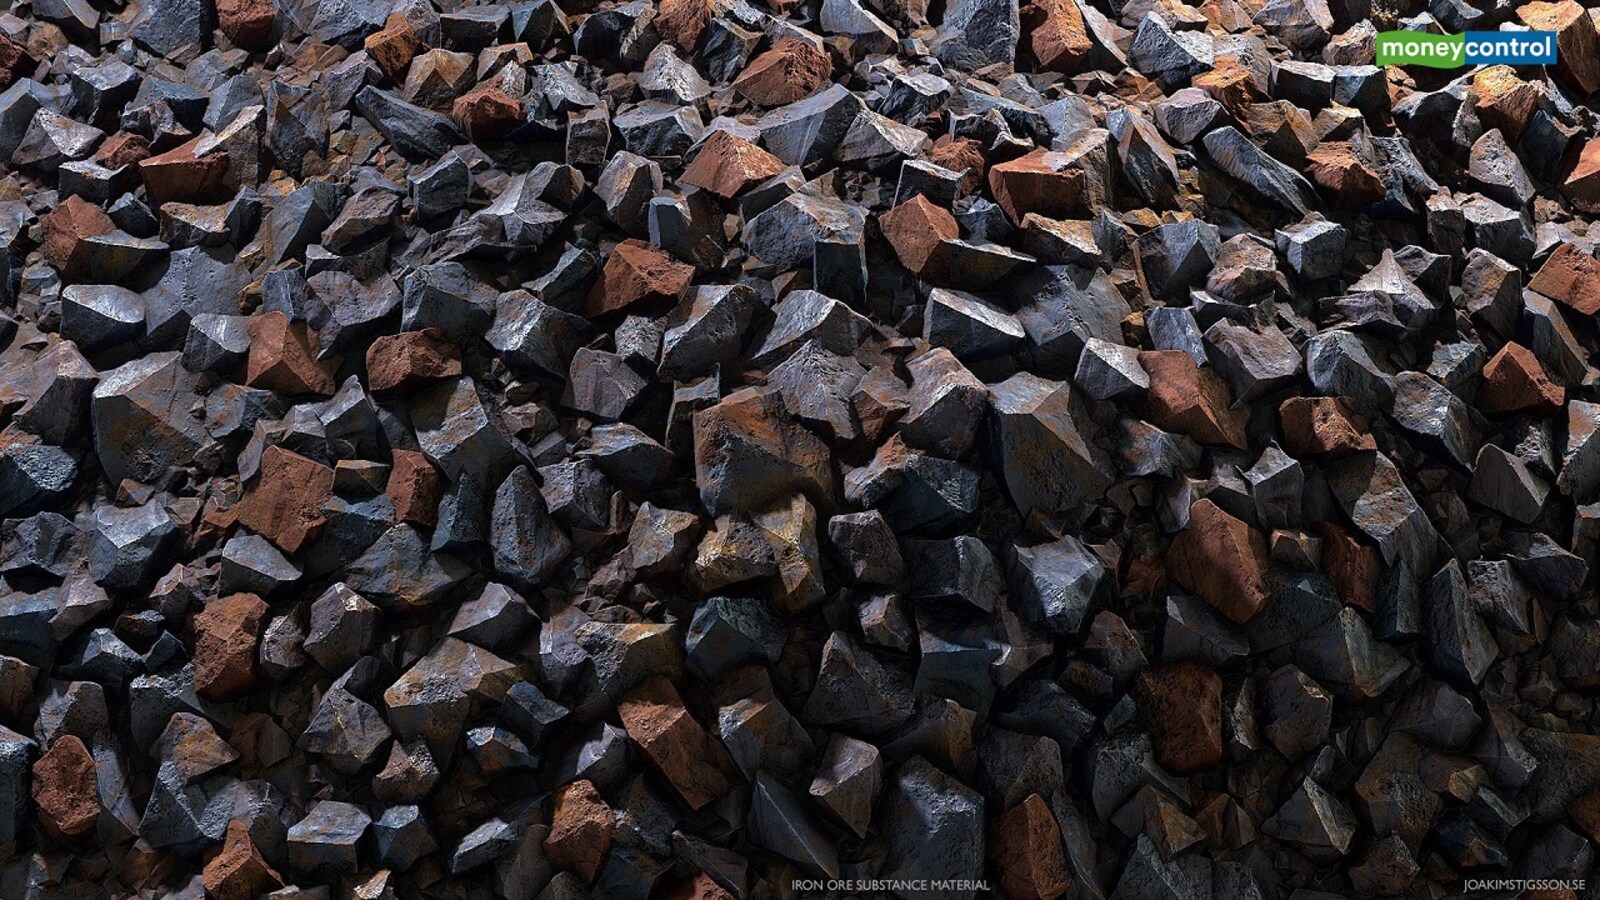 NMDC reduces iron ore lump rate by Rs 200 per tonne